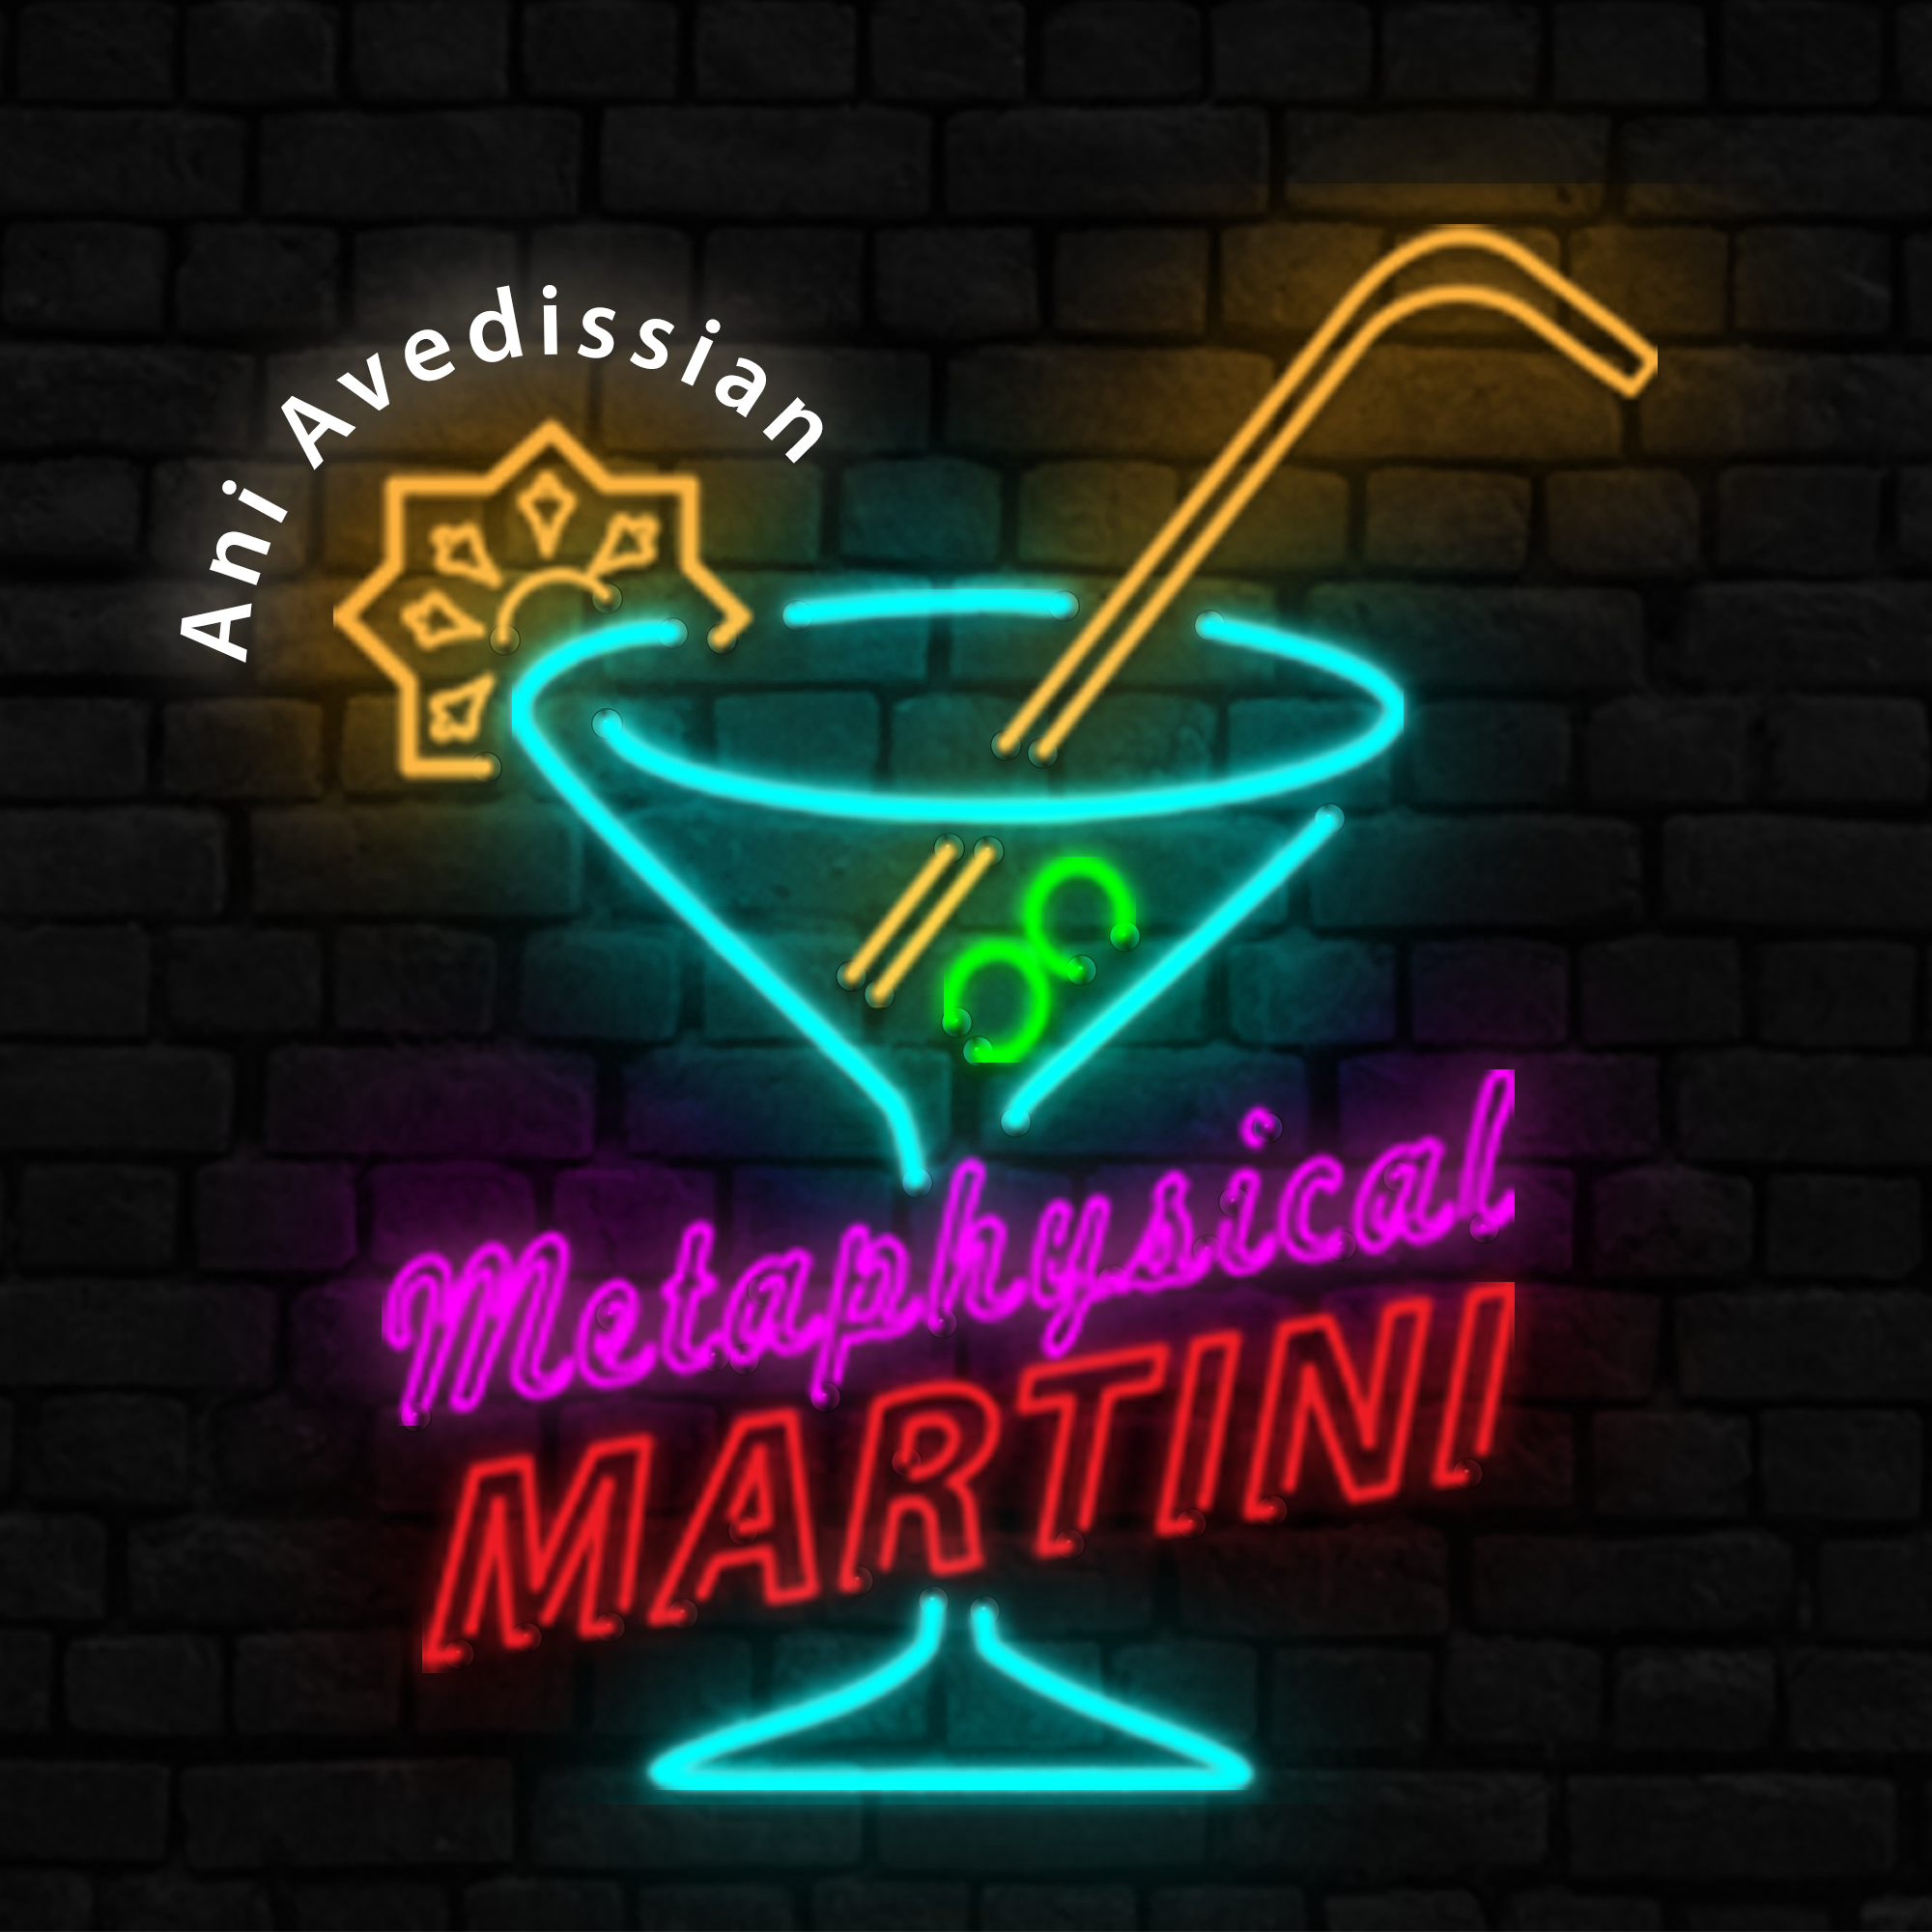 "Metaphysical Martini" 09/30/2020  New format!  All your favorite segments in each broadcast.  All killer - no filler!